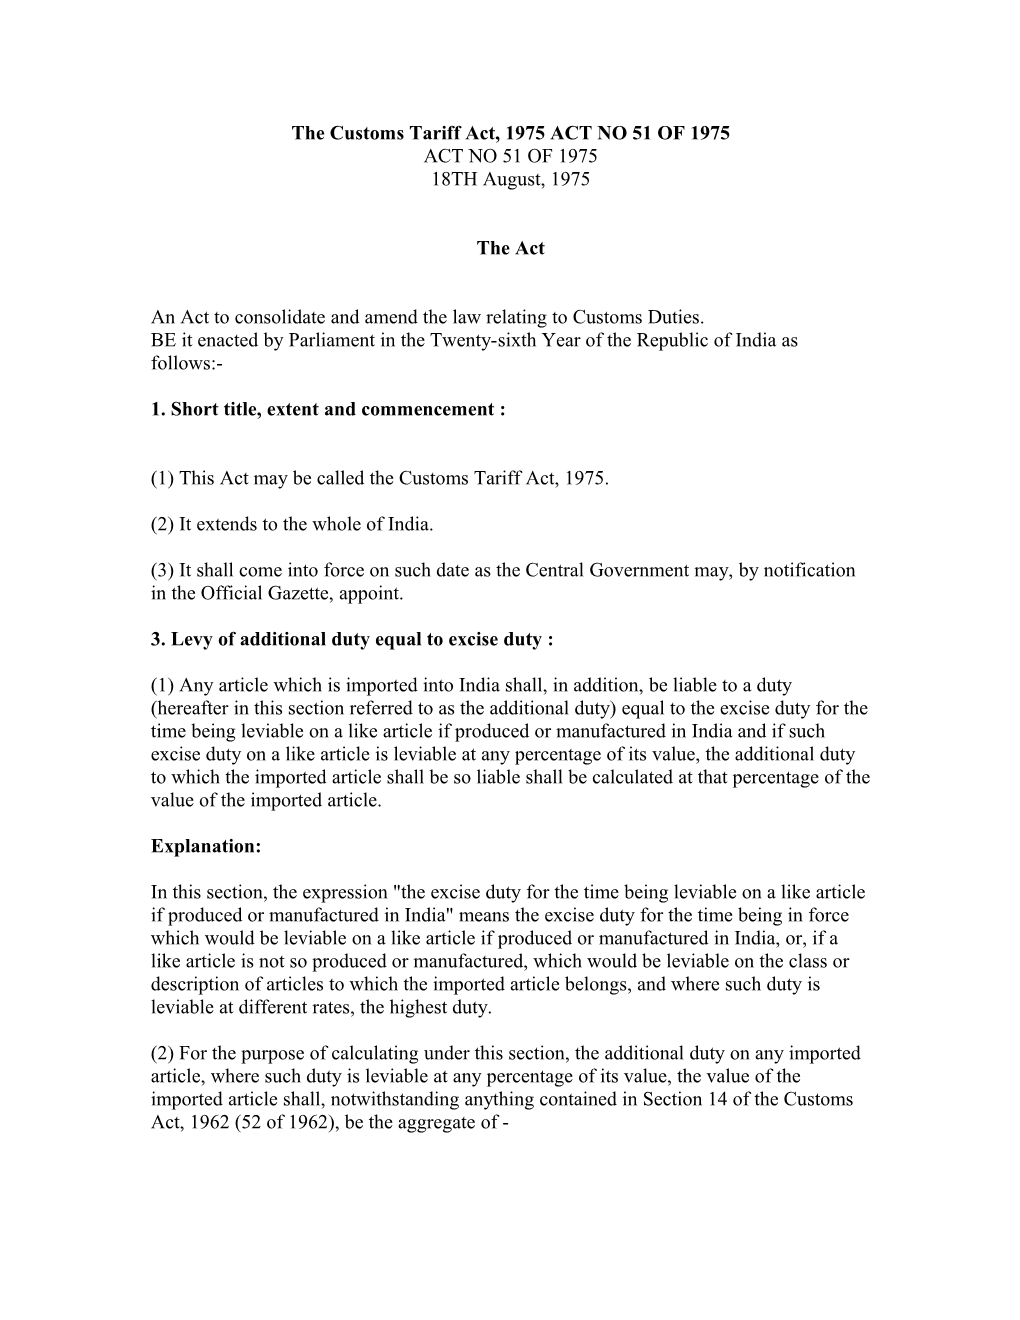 The Customs Tariff Act, 1975 ACT NO 51 of 1975